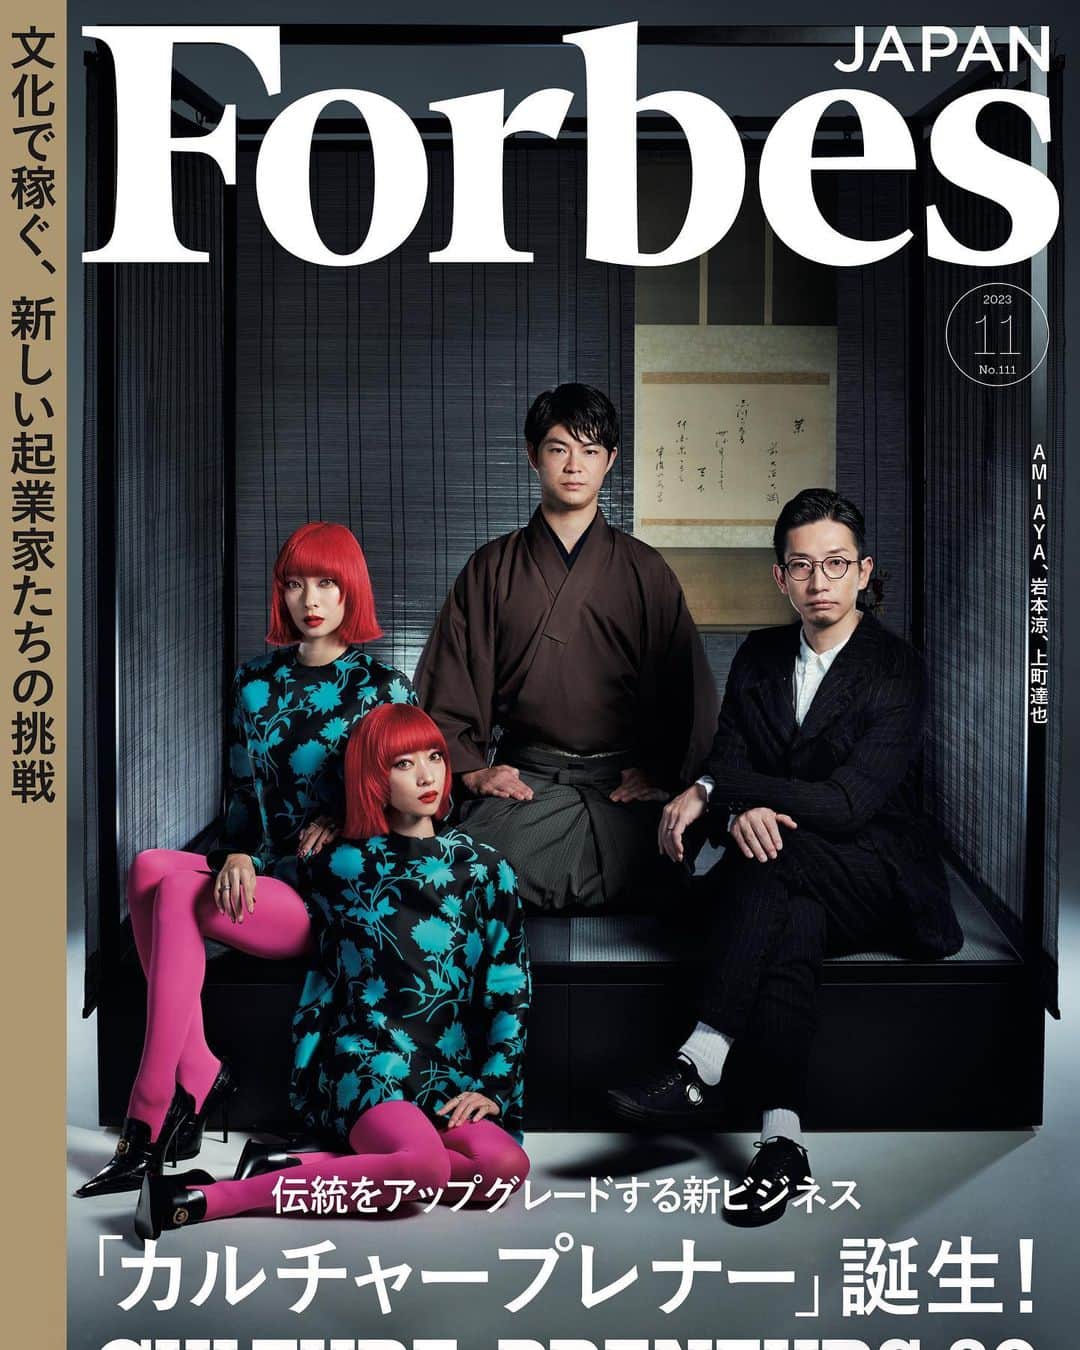 AMIのインスタグラム：「Forbes Japan November is released today.   I am so happy to share this news.  We were chosen as Top 30 Culture-Preneurs and was able to part of the cover 🦋 It truly is an honor.  We will continue to do our best to introduce novel frameworks, new possibilities, and expressions that are most like ourselves to contribute to the world of fashion, and to Japan’s culture.  We won’t fear to challenge and trust our possibilities to continue to take our steeps forward.   Forbes Japan November - There are also interviews in the magazine so please check it out   本日発売forbes japan11月号🌹 とっても嬉しい報告が出来て幸せです。 カルチャープレナーの 30組の中に選出して頂き表紙を務めさせて頂きました💎 本当に光栄です。 新しい概念、新しい可能性、私達にしか出来ない表現を確立して常にアップデートしていけるように。  ファッションを通して表現する楽しさや、人生の喜びや日々の彩りを発信し、大好きなファッションの世界に貢献していけるよう、そして日本のカルチャーに少しでも貢献出来るよう精進していきたいと思います。  これからも挑戦することを恐れず 自分達自身の可能性を信じて 1歩1歩進んでいきたいです。  forbes japan11月号 表紙の他に中ページにはインタビューも載っております。 是非ご覧下さい🙇‍♂️✨  photograph by @jan_buus styling by @yoppy0105 hair and make-up by @katohairmake text by @kumima007」